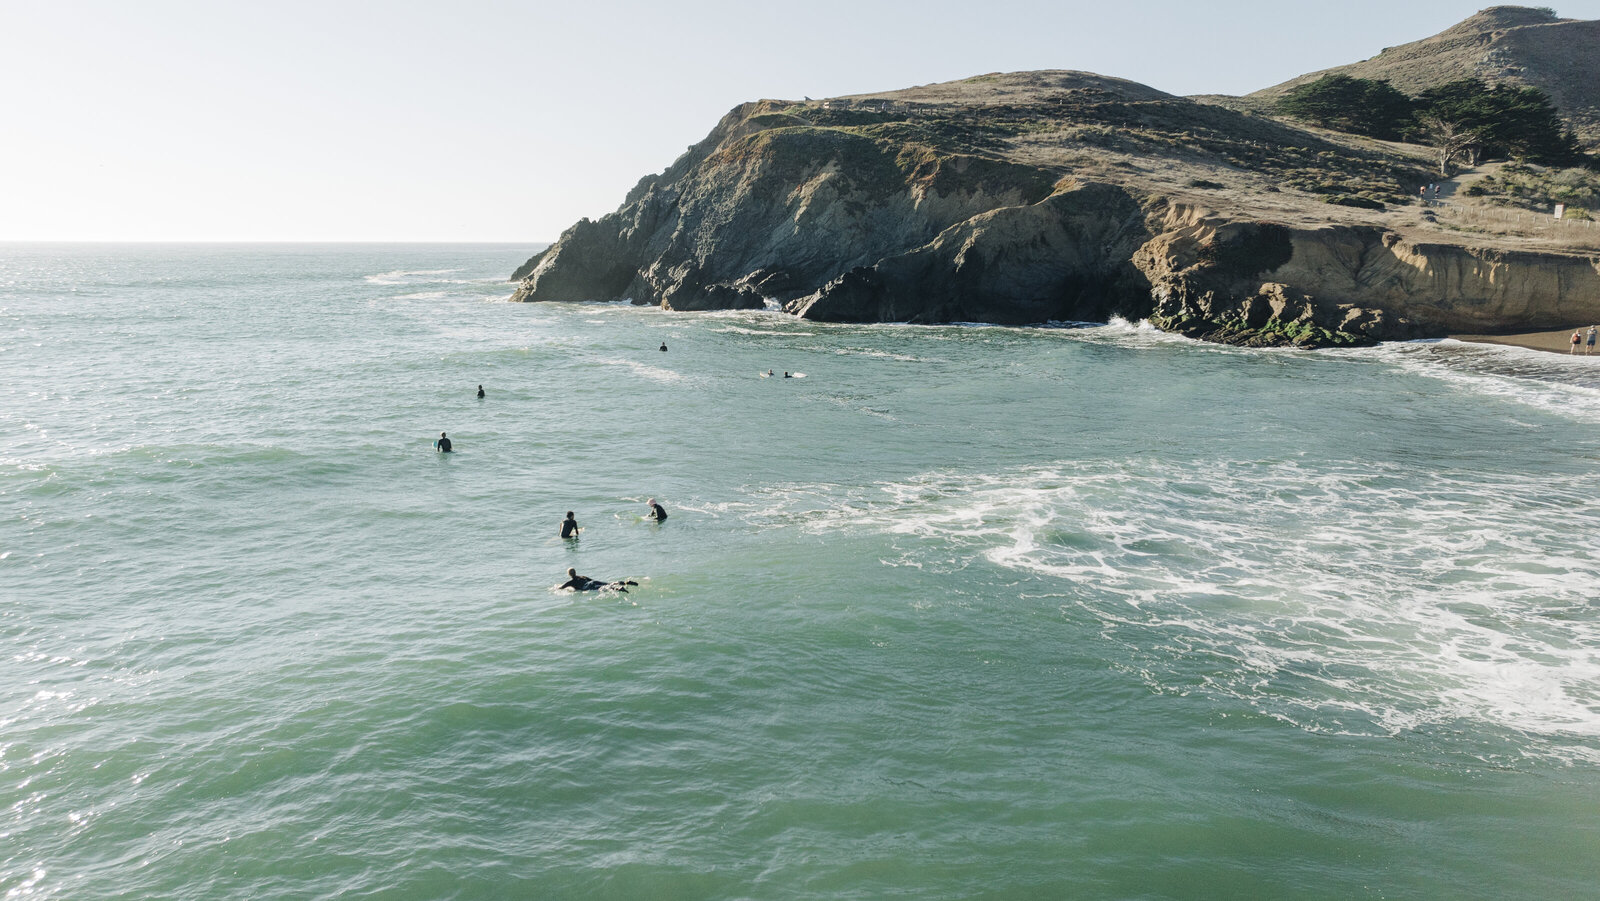 Surfers in the ocean near a rugged cliff under a clear sky, captured by a Destination Wedding Photographer.